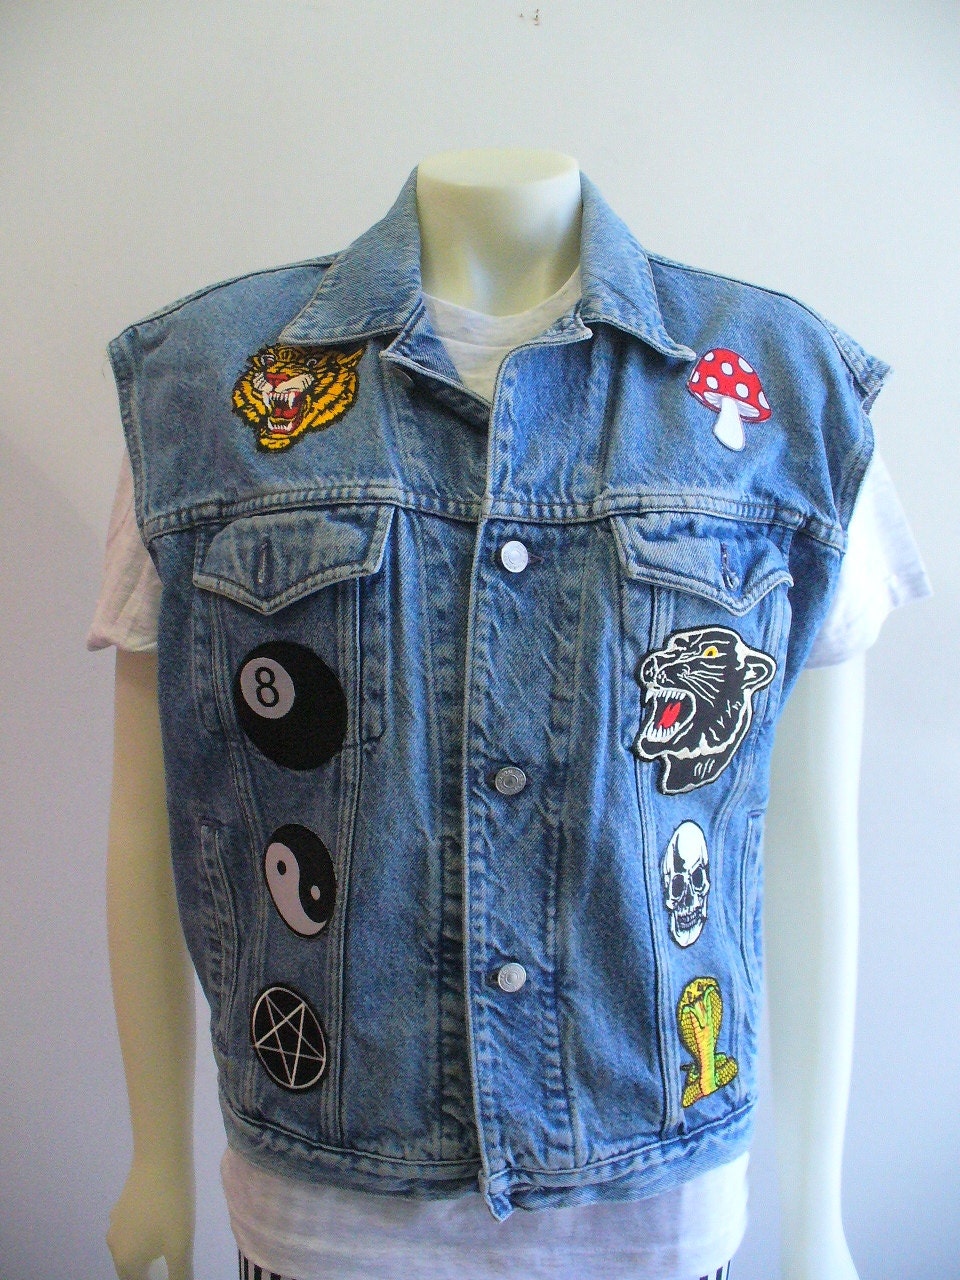 One of a Kind Denim Vest w/ Patches